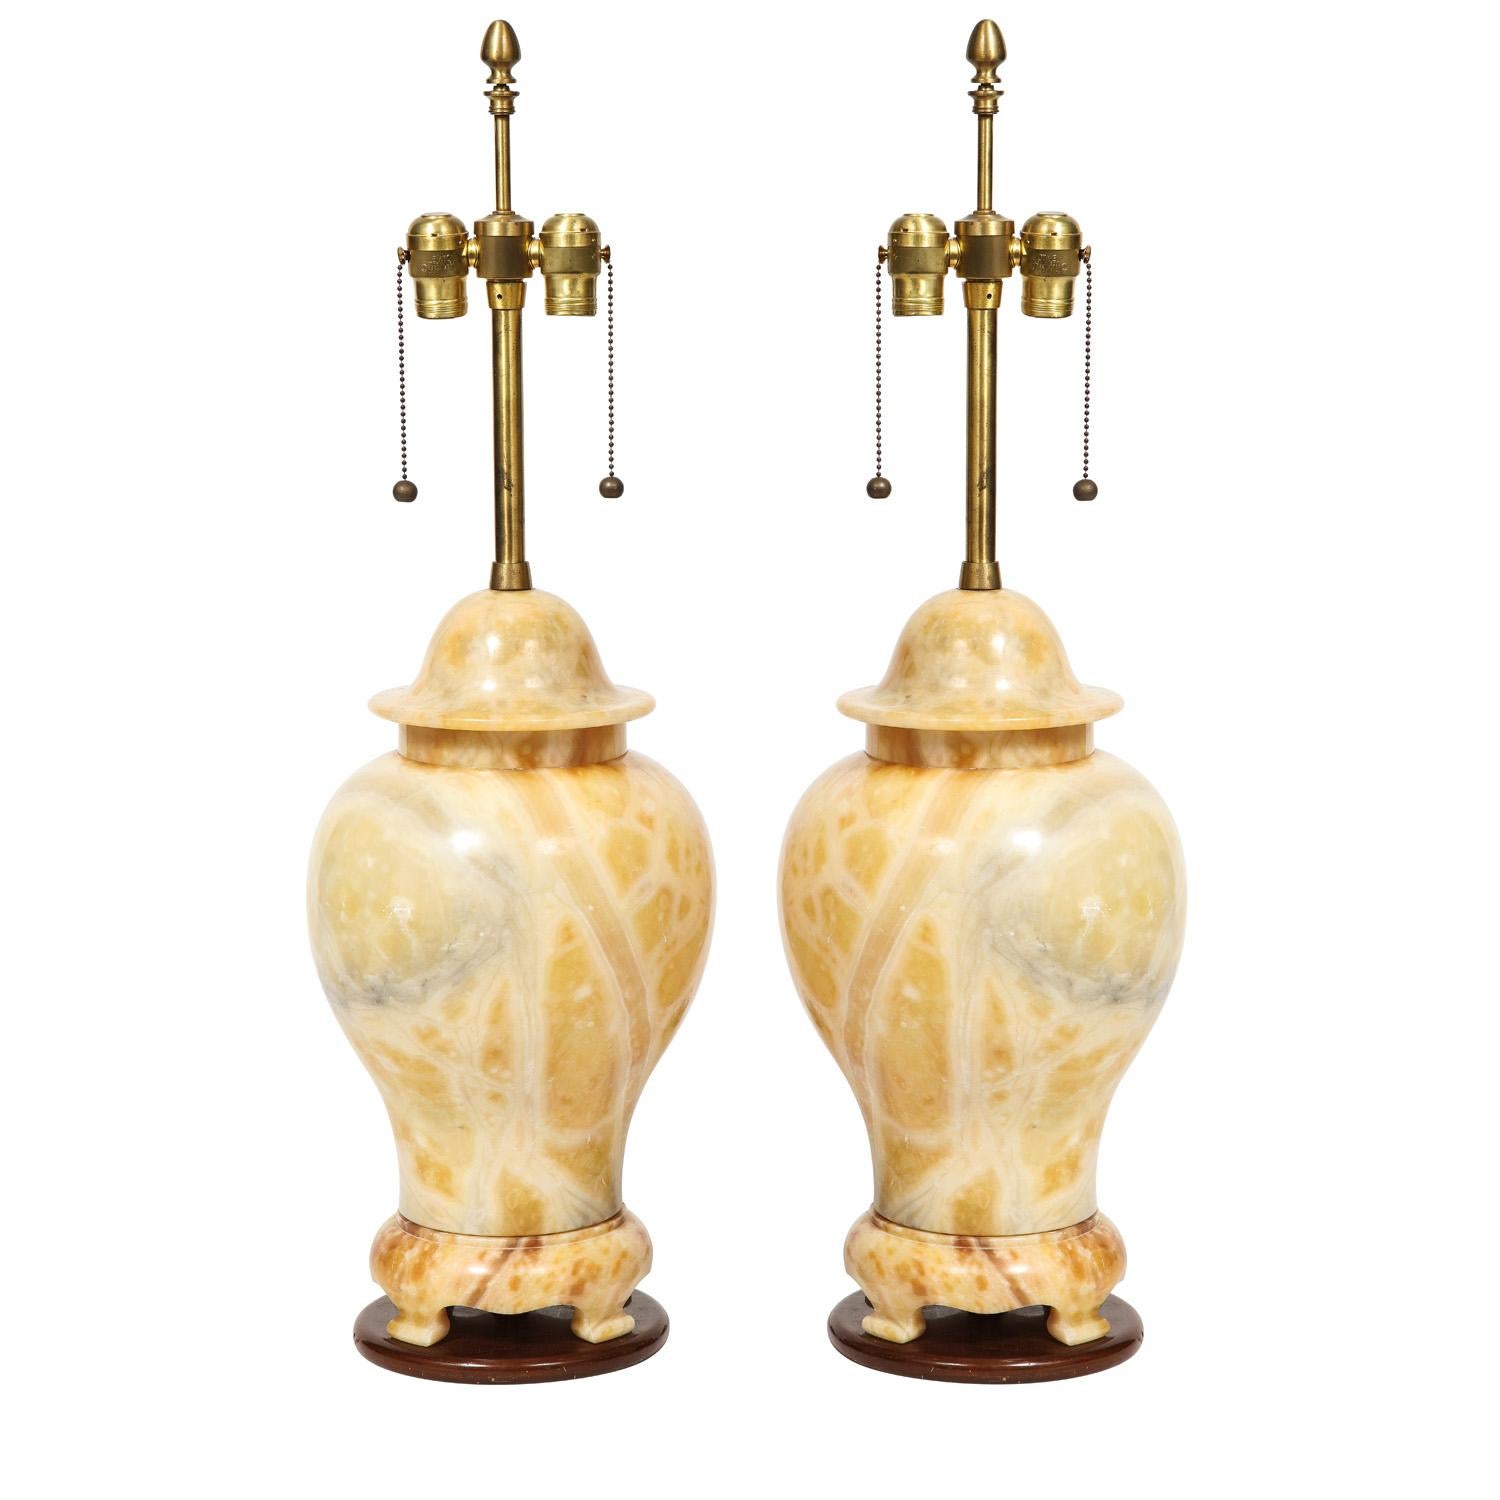 Pair of artisan table lamps, ginger jar design in solid figured yellow marble with brass hardware on dark wood bases, Italian 1960's. The craftsmanship in making these lamps is superb. The coloration is stunning.

Diameter: 9 inches
Height: 33